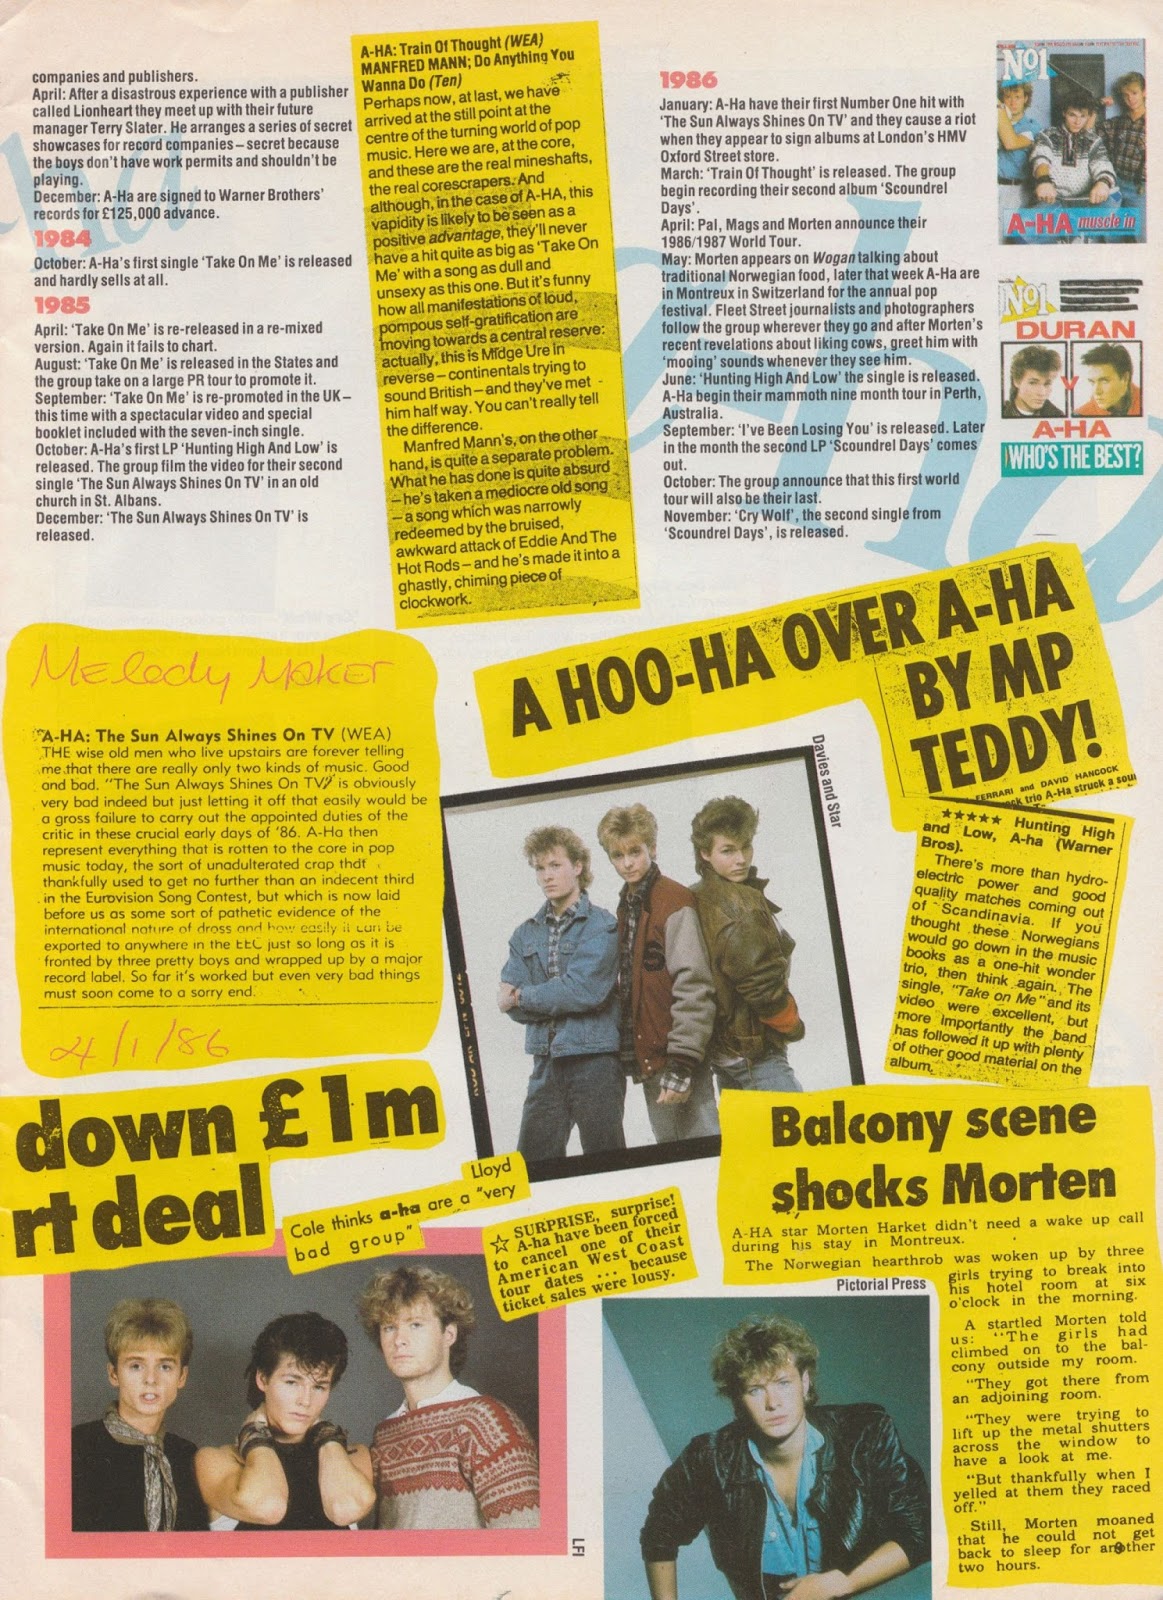 Top Of The Pops 80s: Aha - Number One Magazine 1986